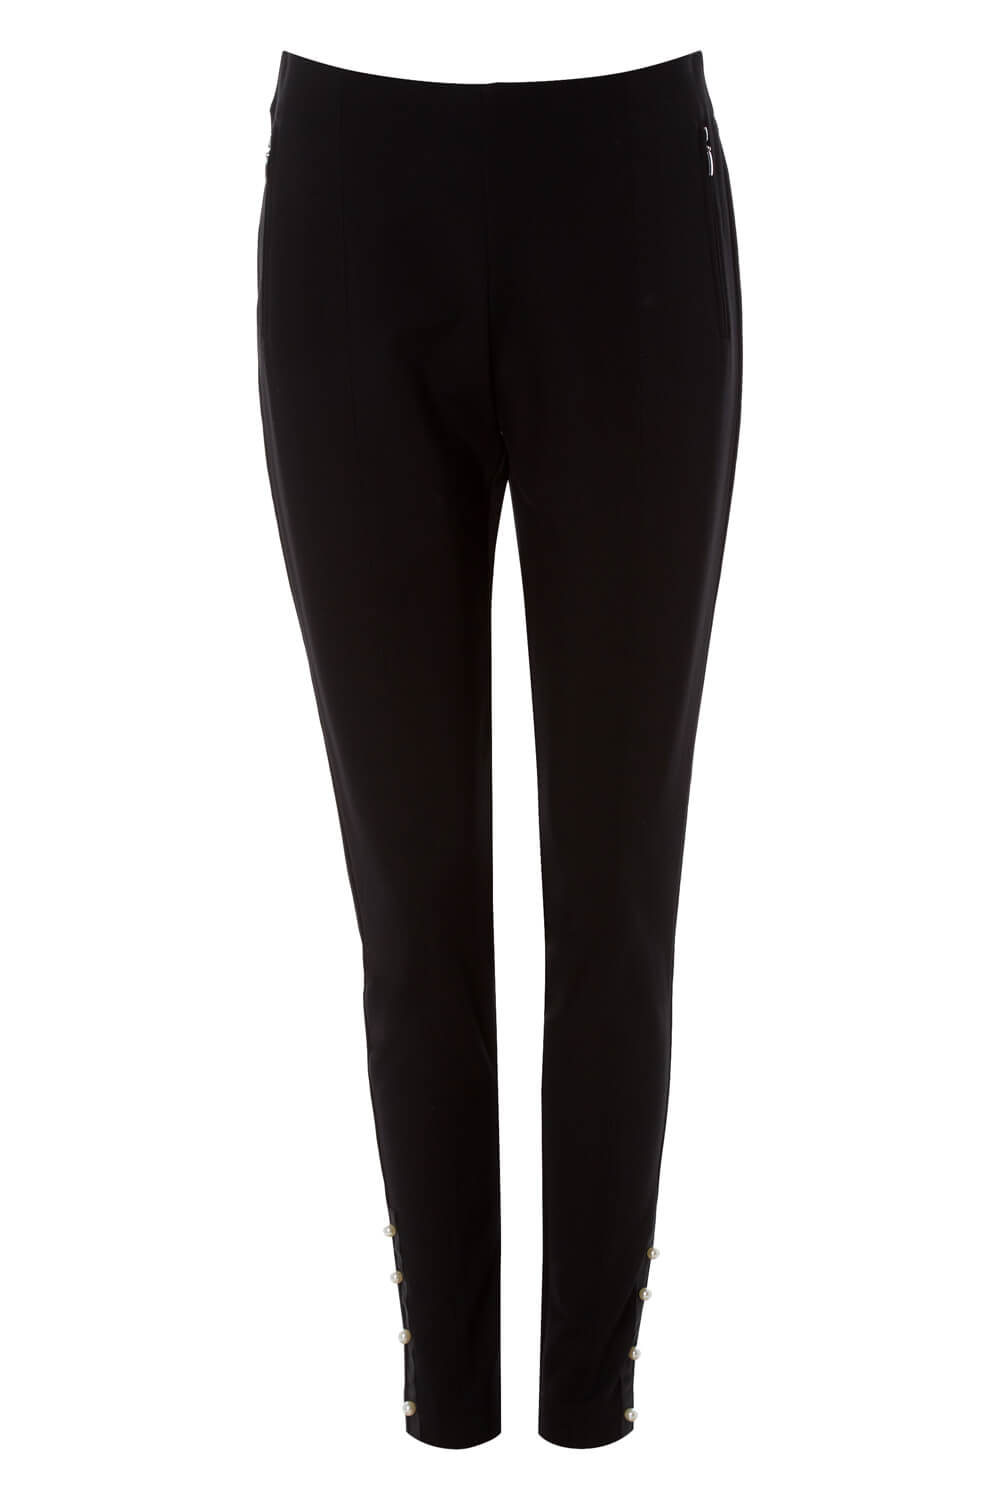 Black Pearl Detail Stretch Trousers, Image 5 of 5